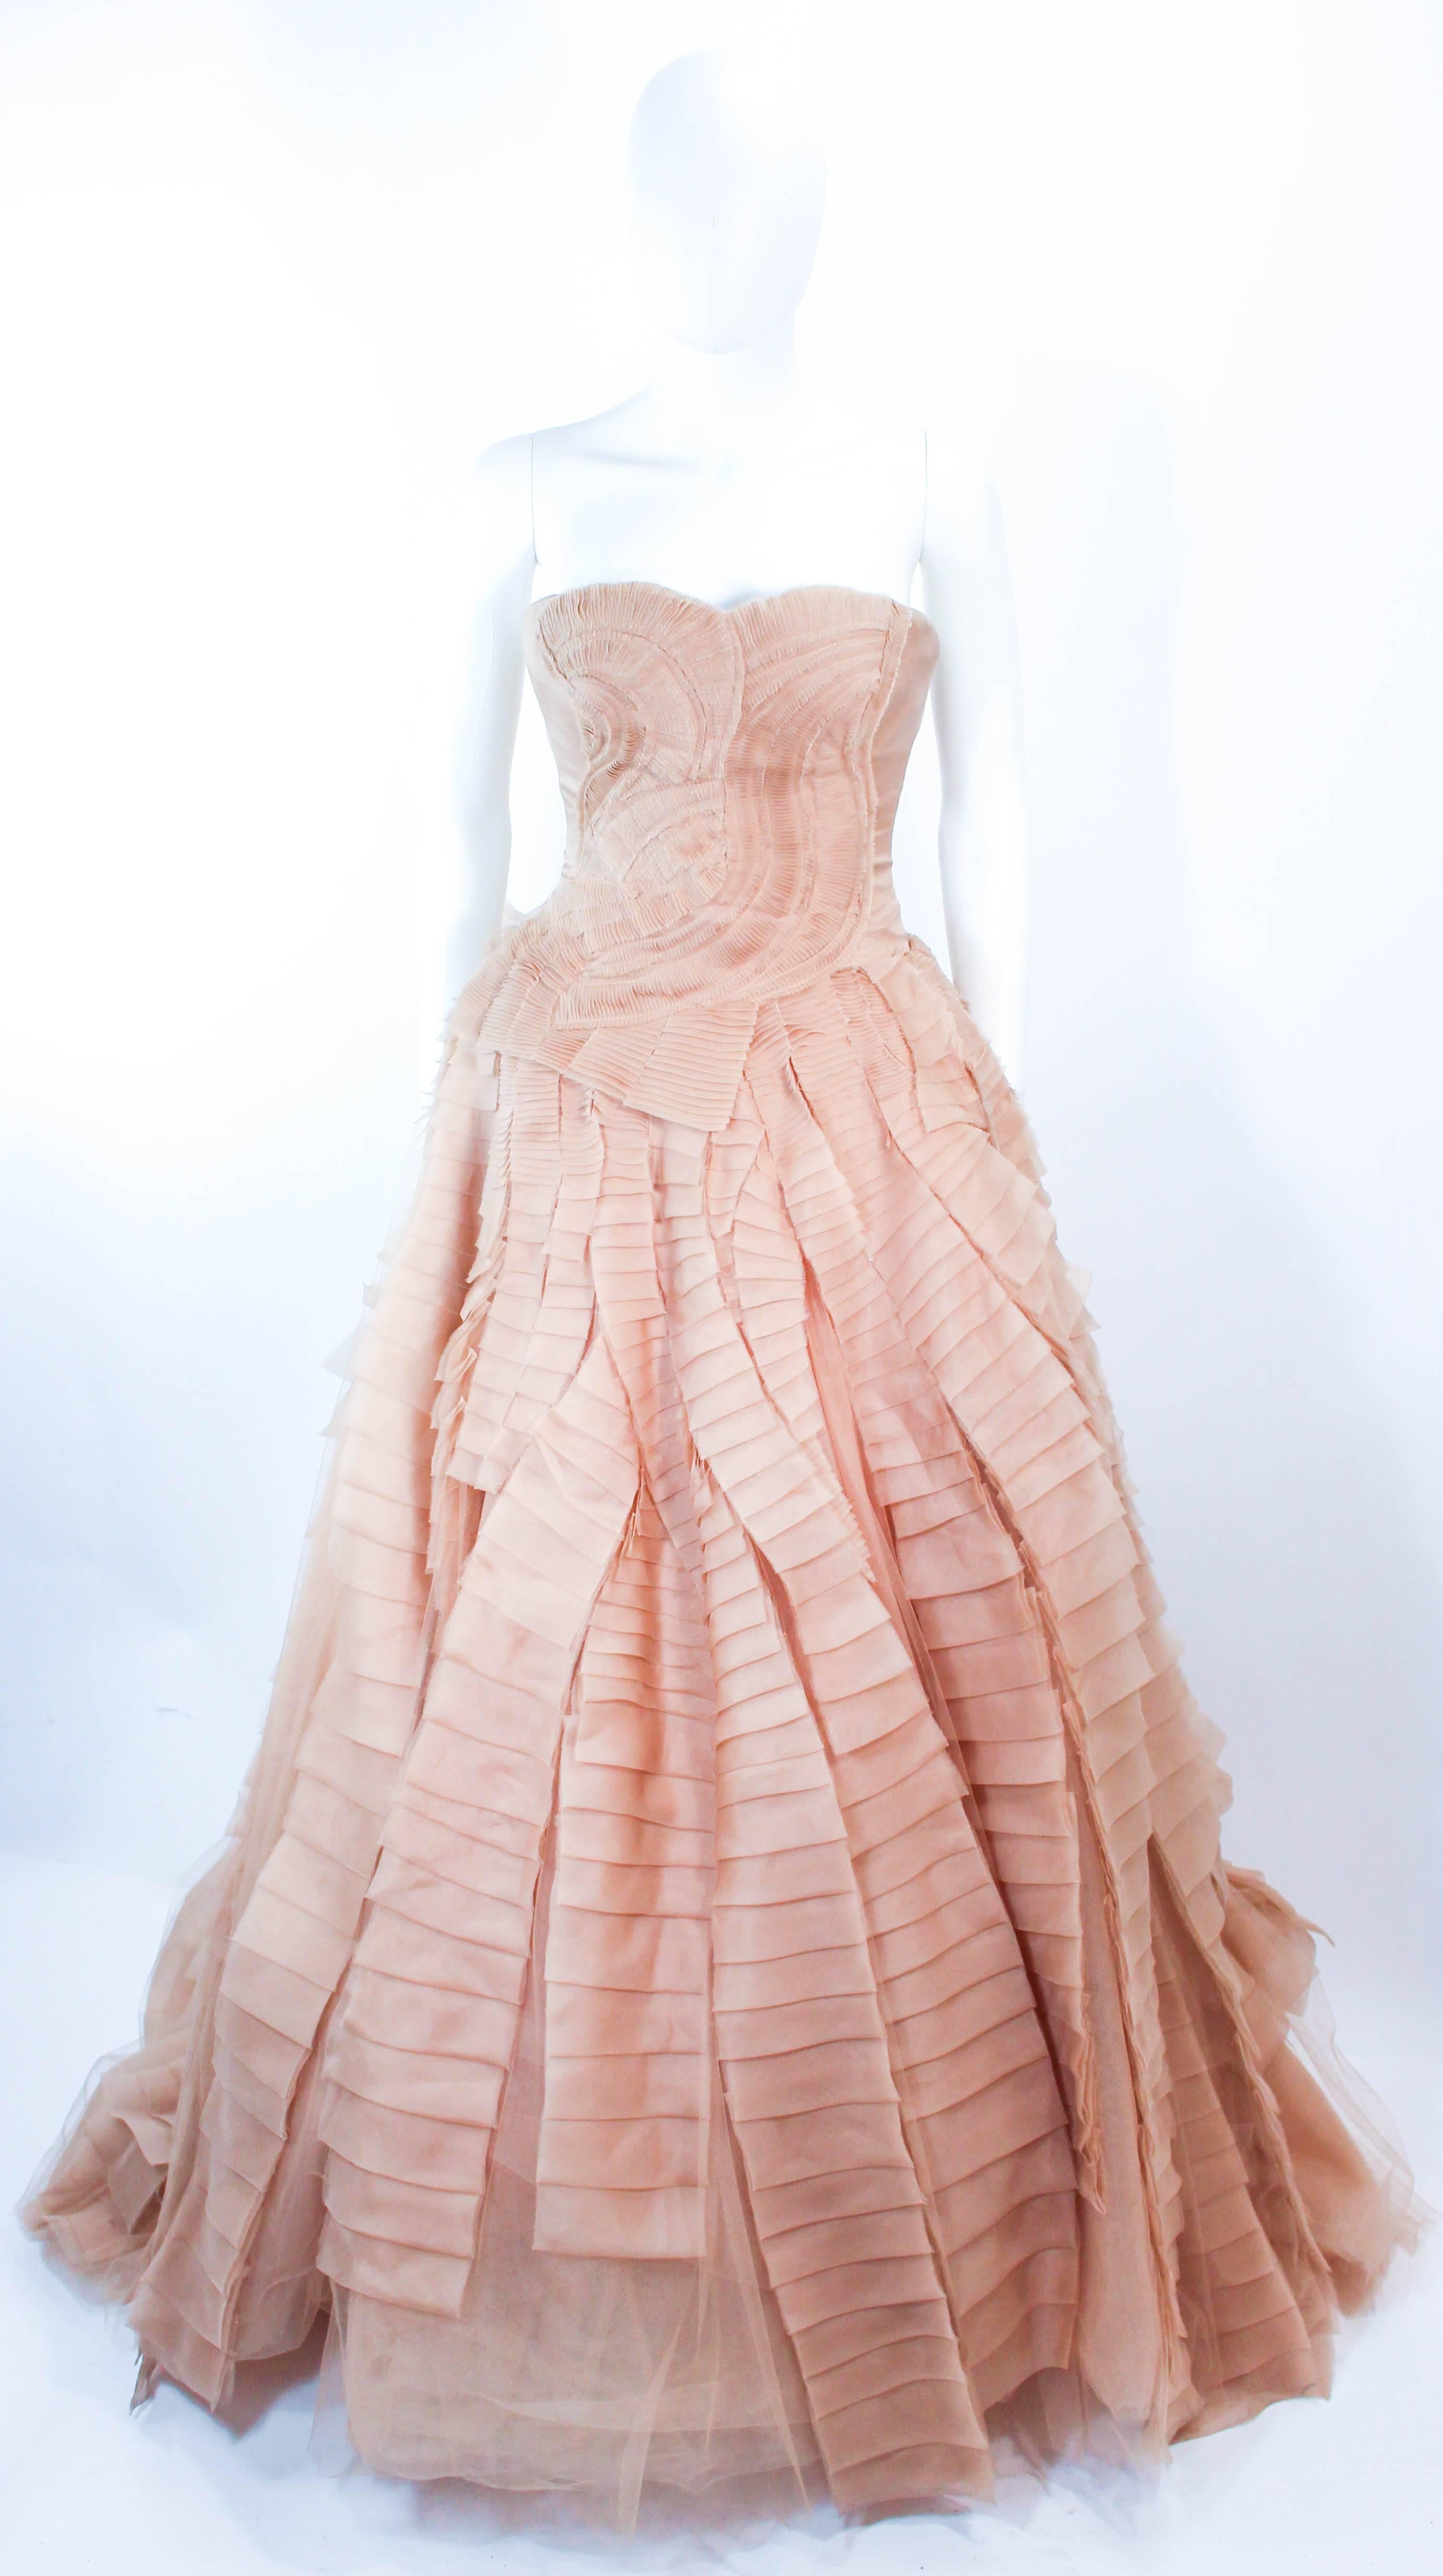 This Vera Wang wedding gown is composed of layers of nude organza and tulle. The bodice features a gathered detailing with a boned interior and center back zipper closure. In excellent pre-owned condition (there are a few faint spots due to